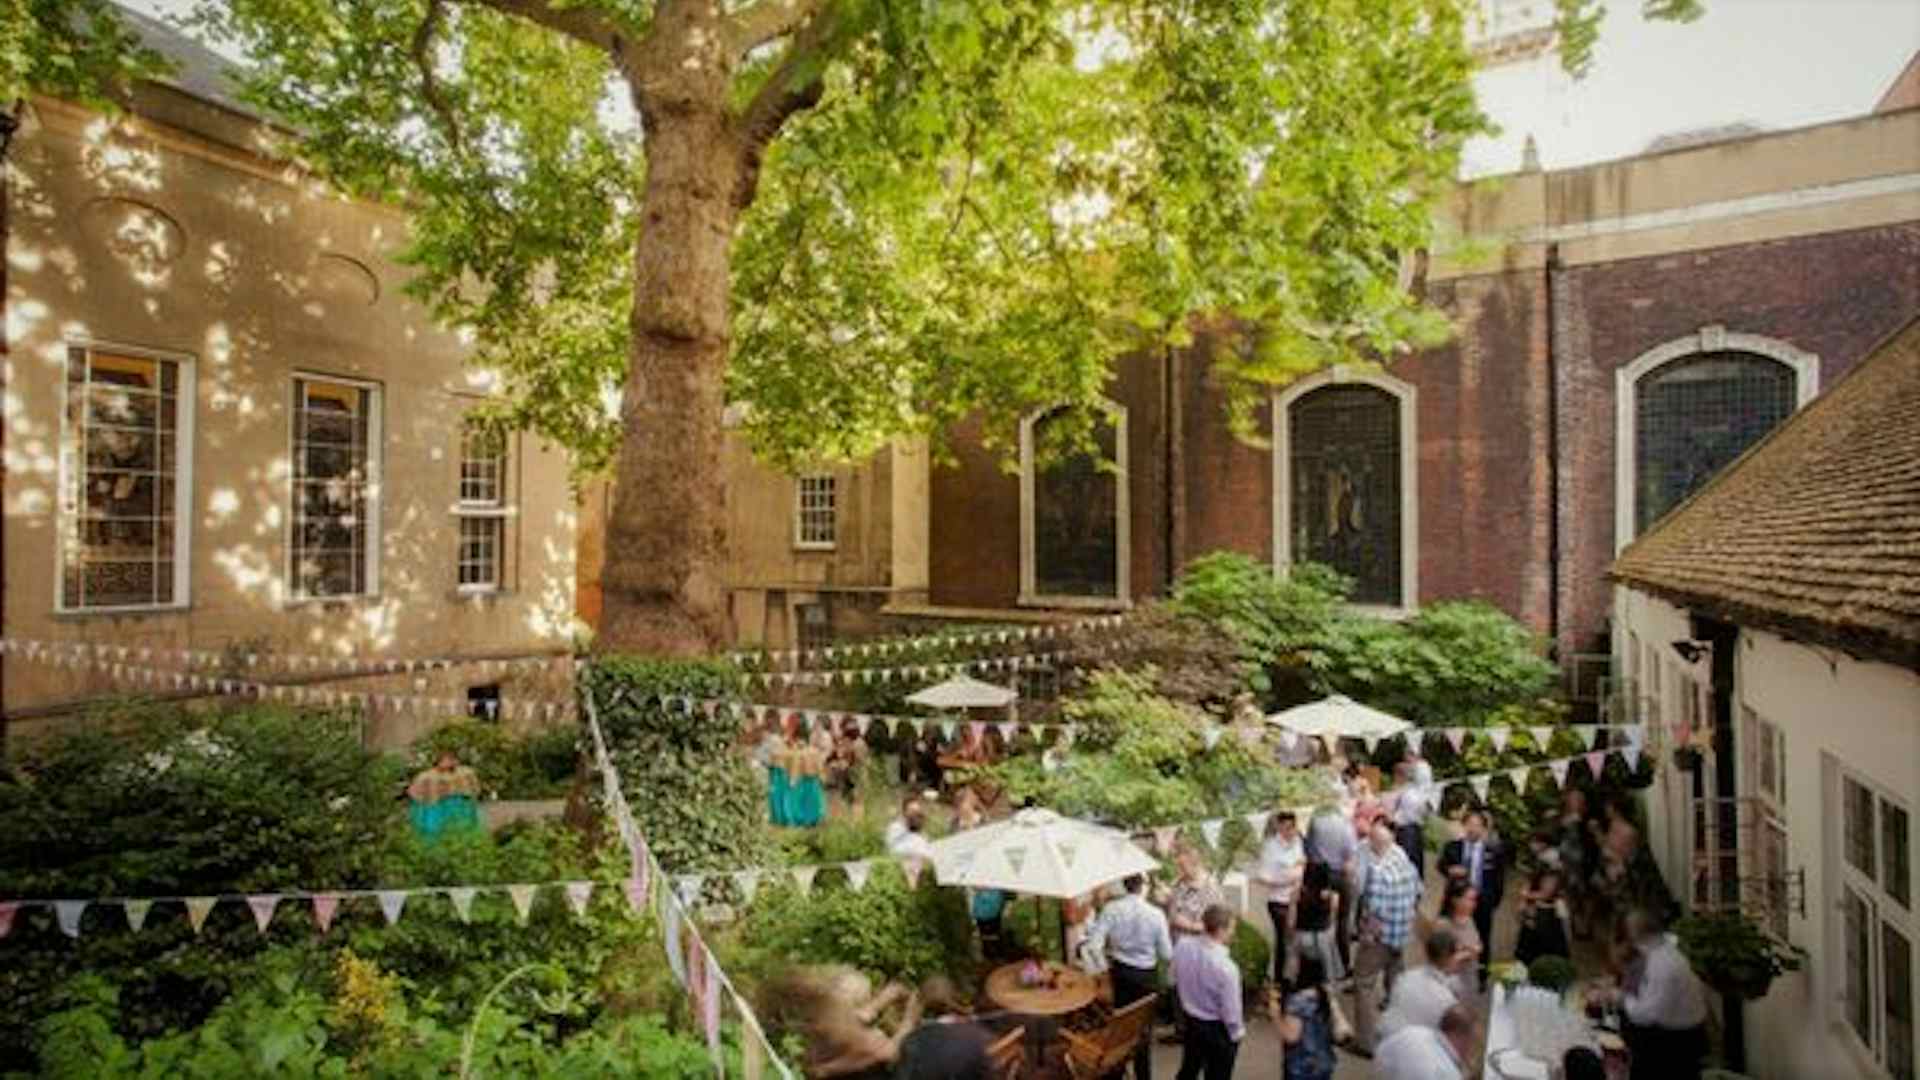 Make History With an Event at Stationers’ Hall and Garden